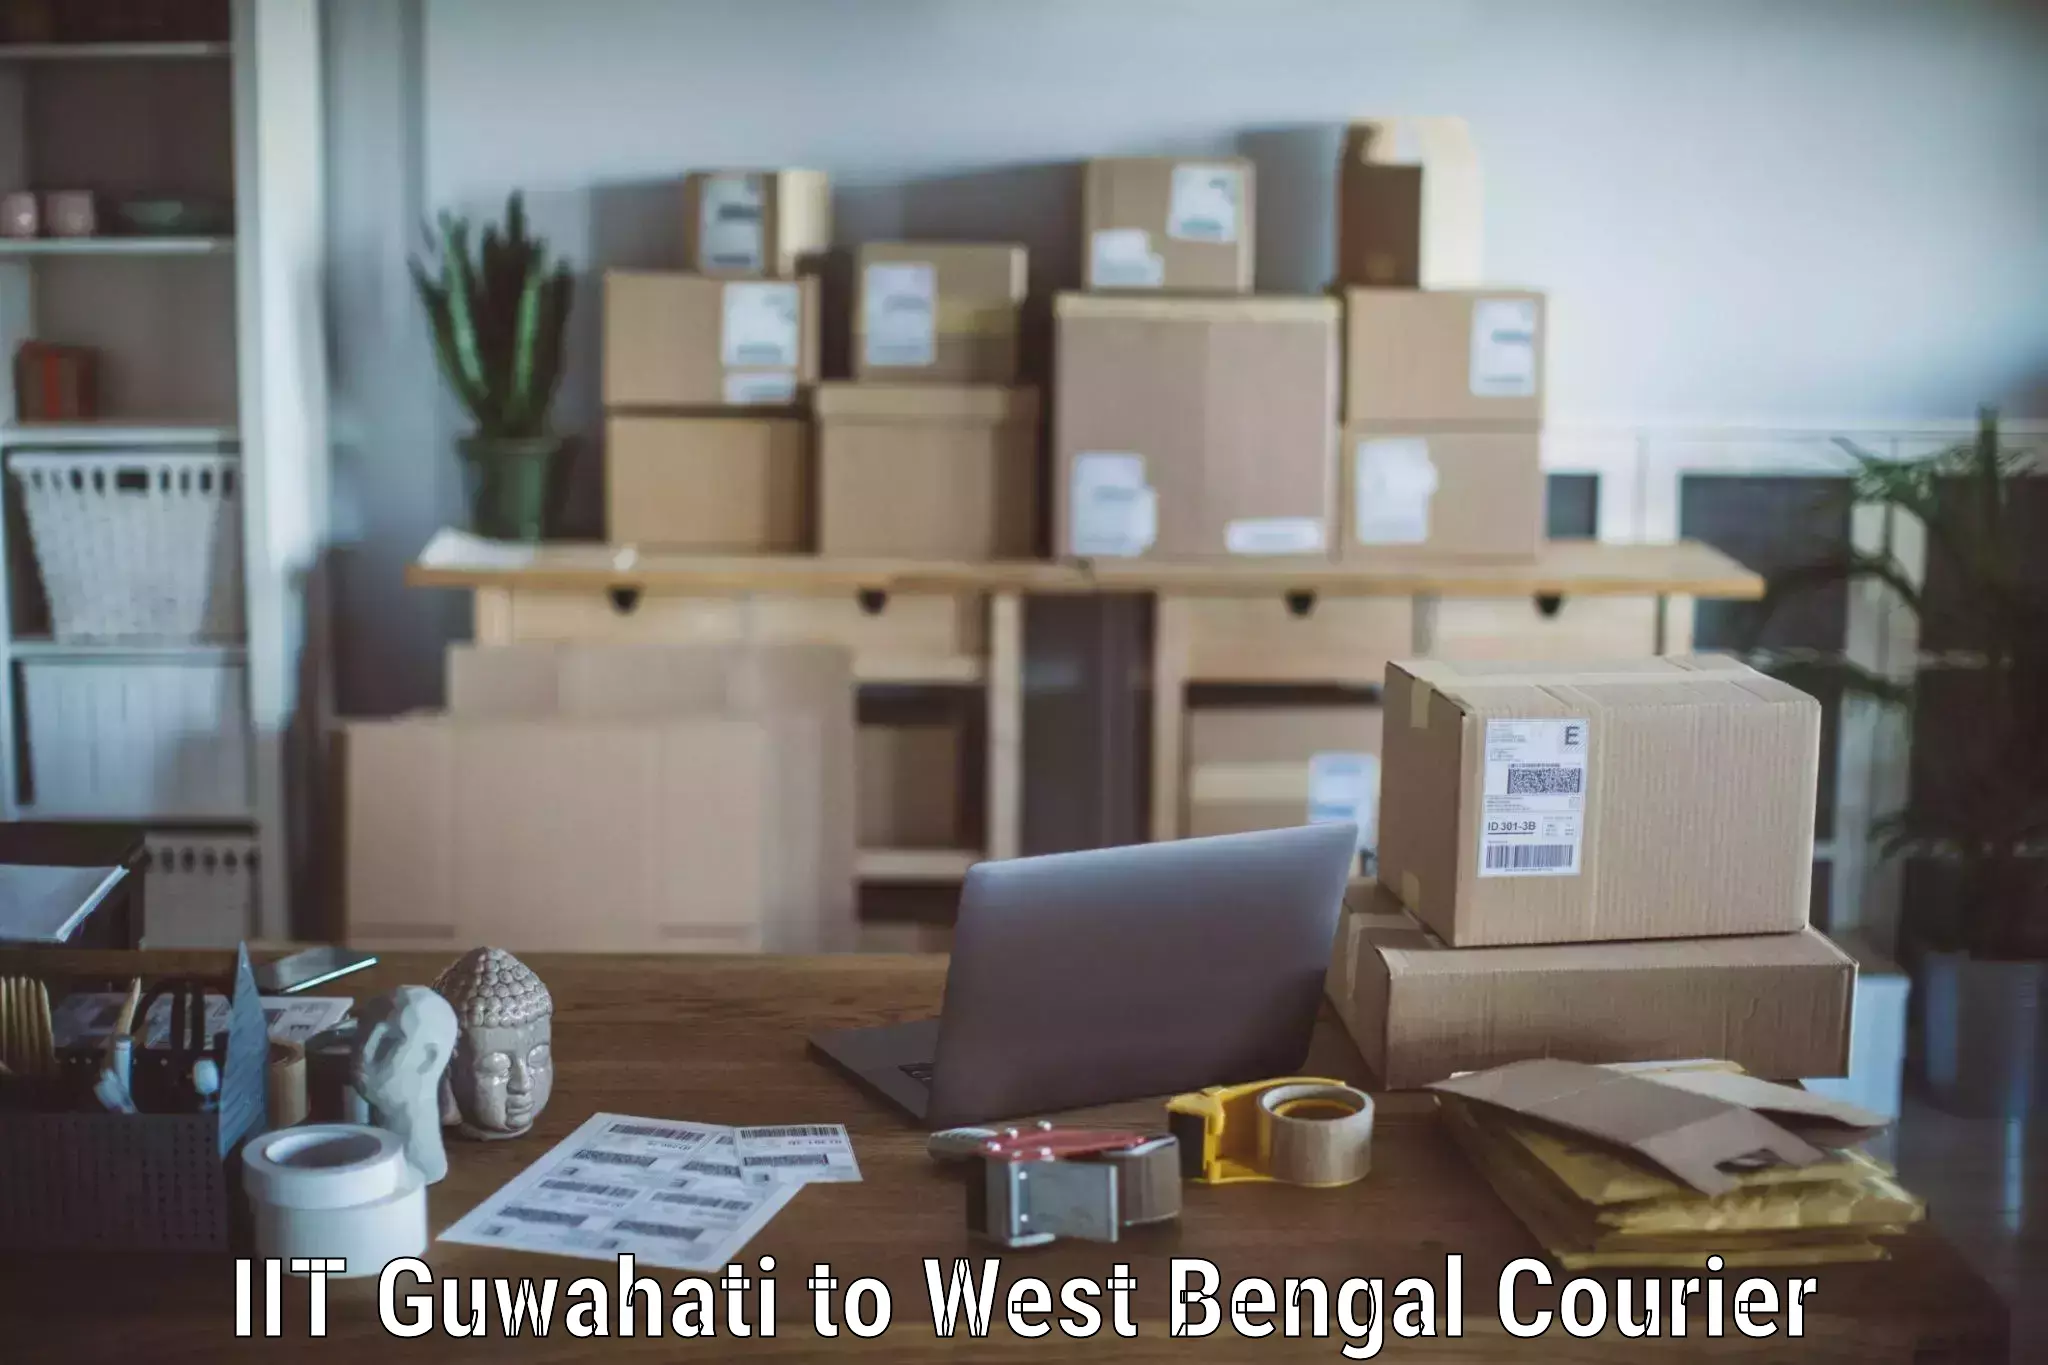 Residential moving experts IIT Guwahati to West Bengal